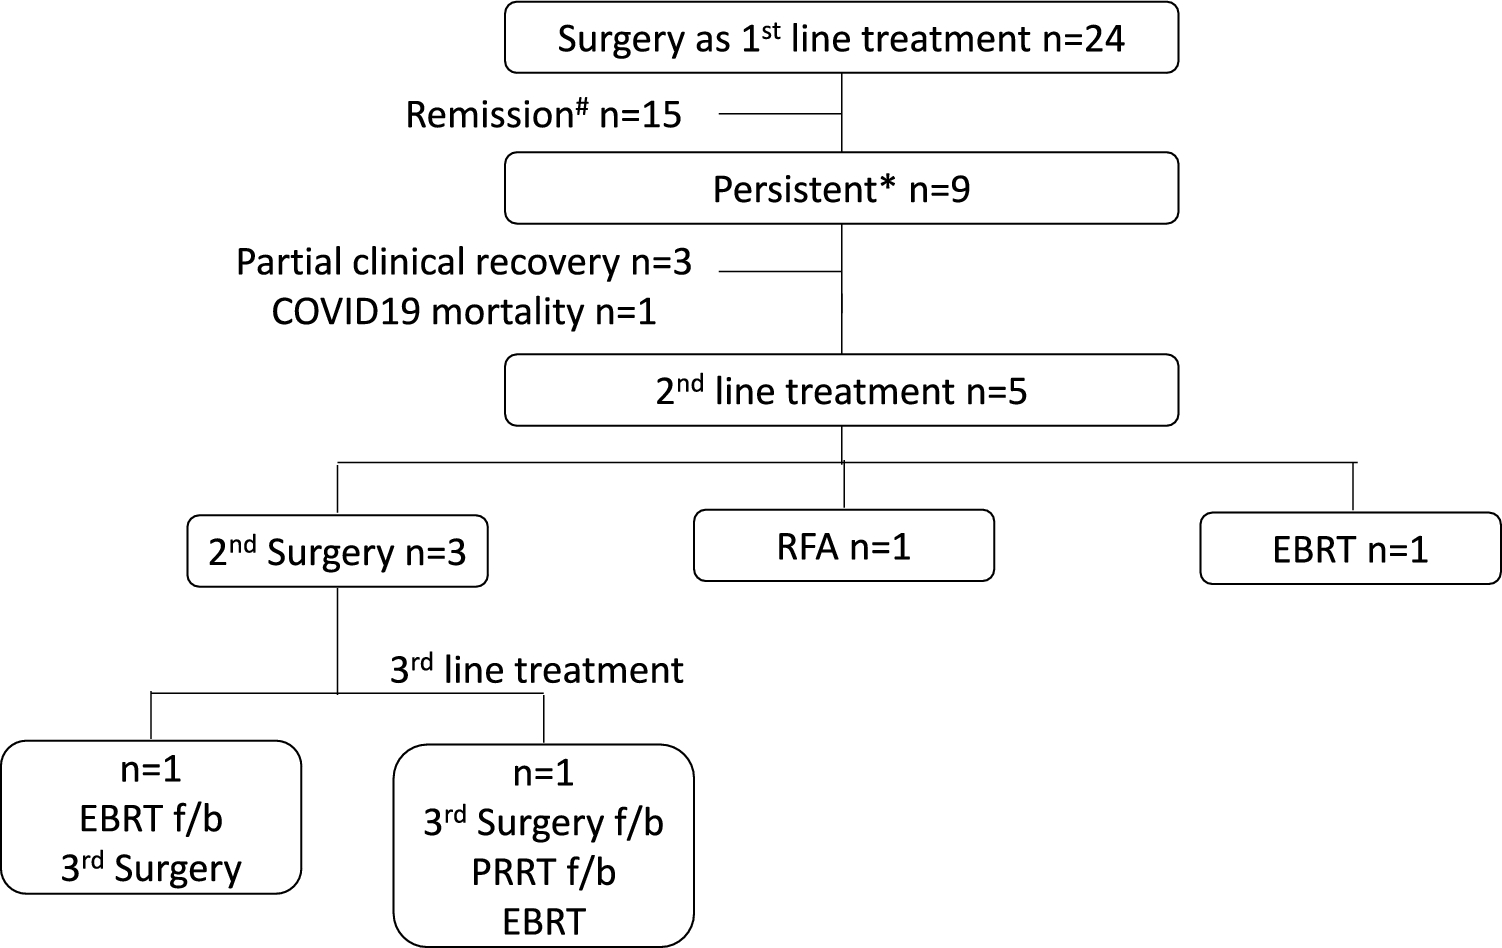 Long-Term Follow-Up Data of Tumor-Induced Osteomalacia Managed with Surgery and/or Radiofrequency Ablation from a Single Center